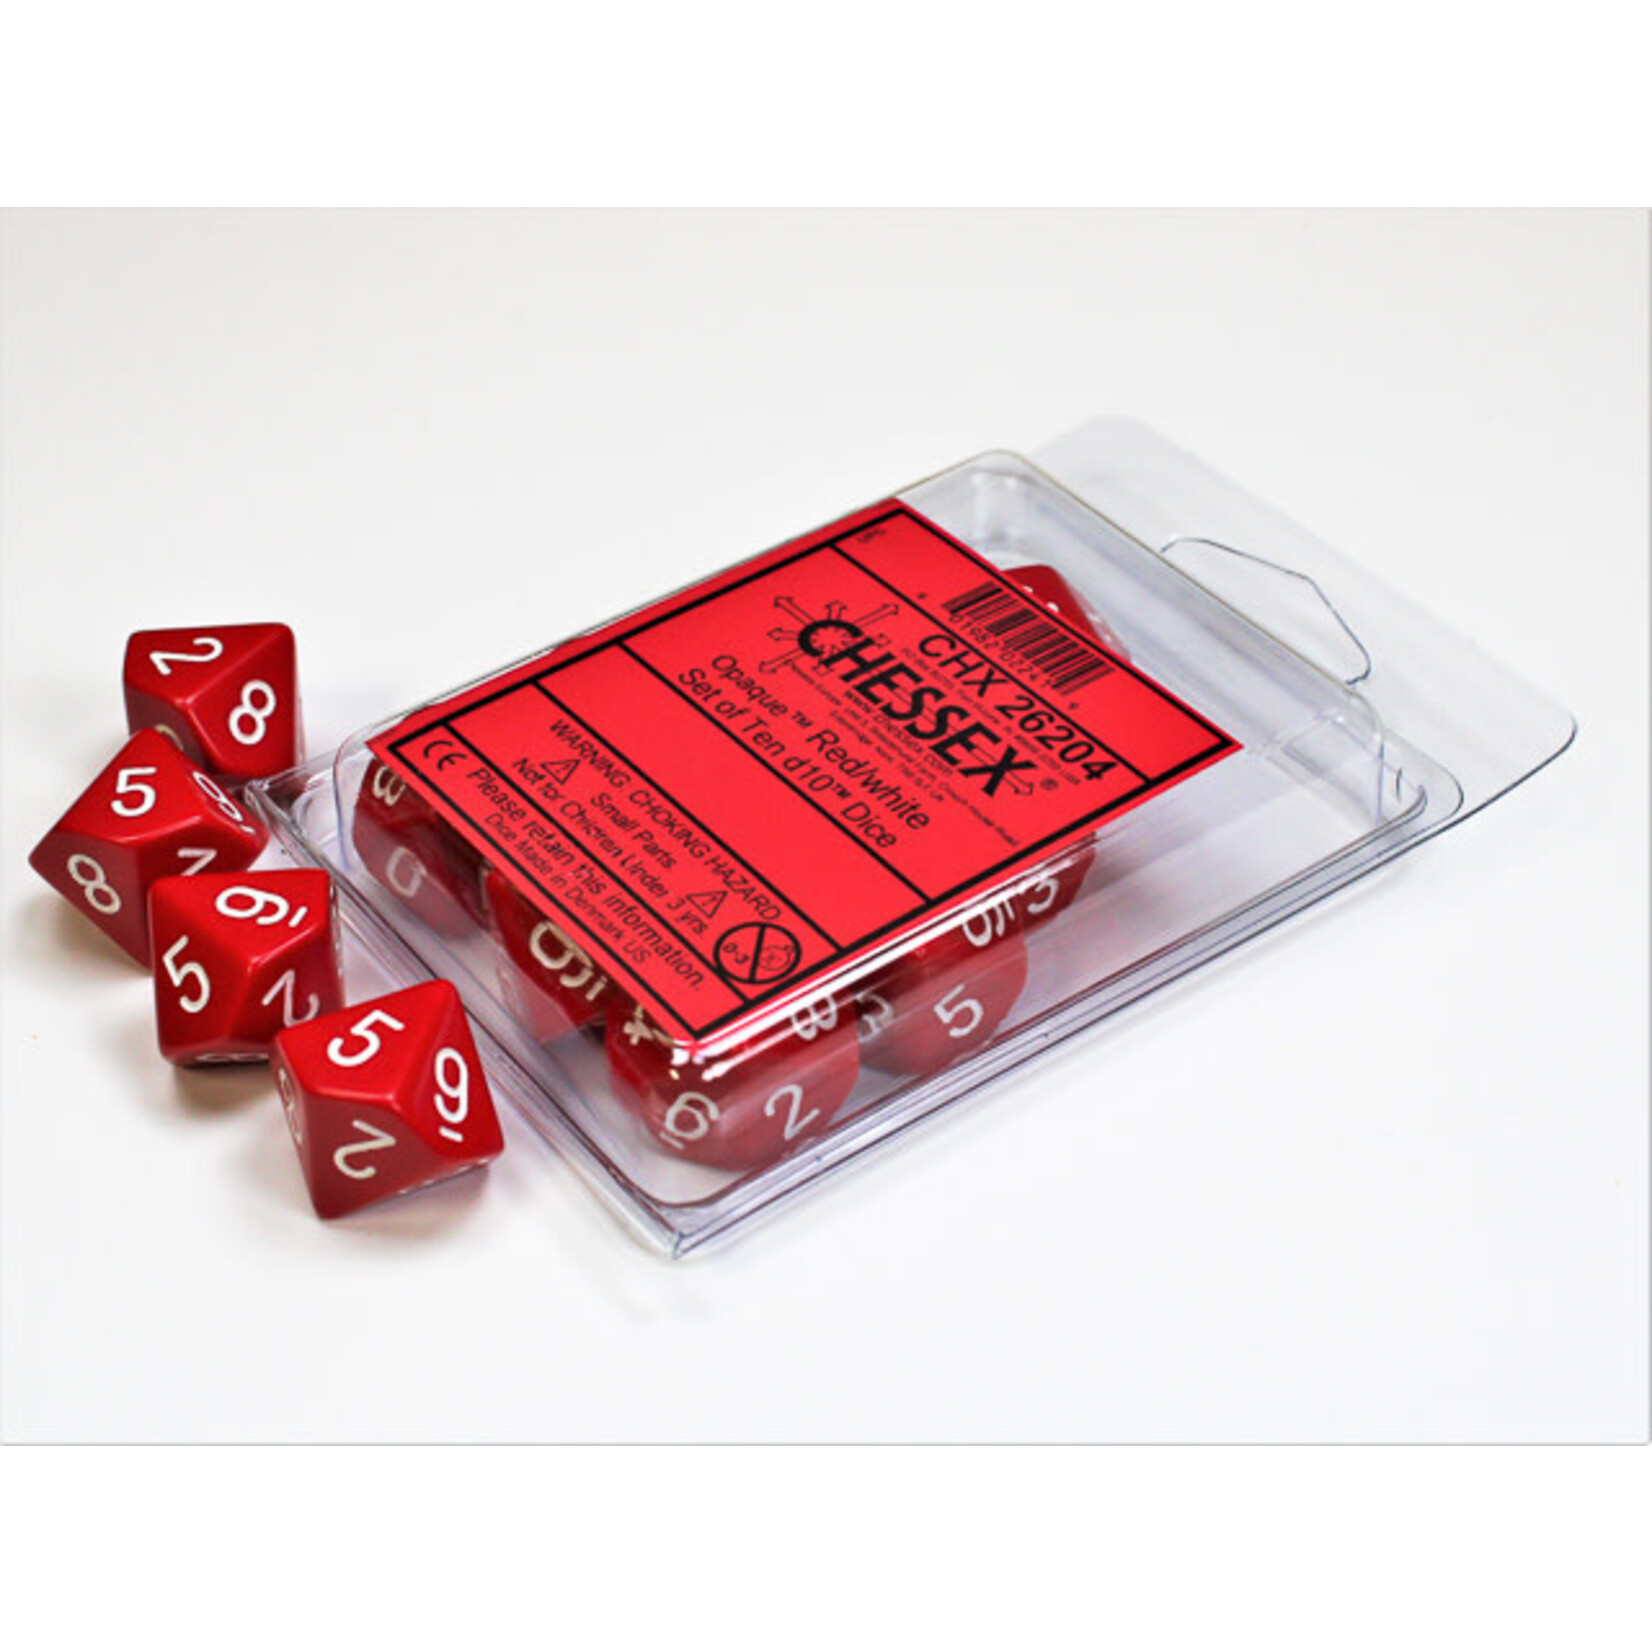 Chessex Opaque Red/white Set of Ten d10s